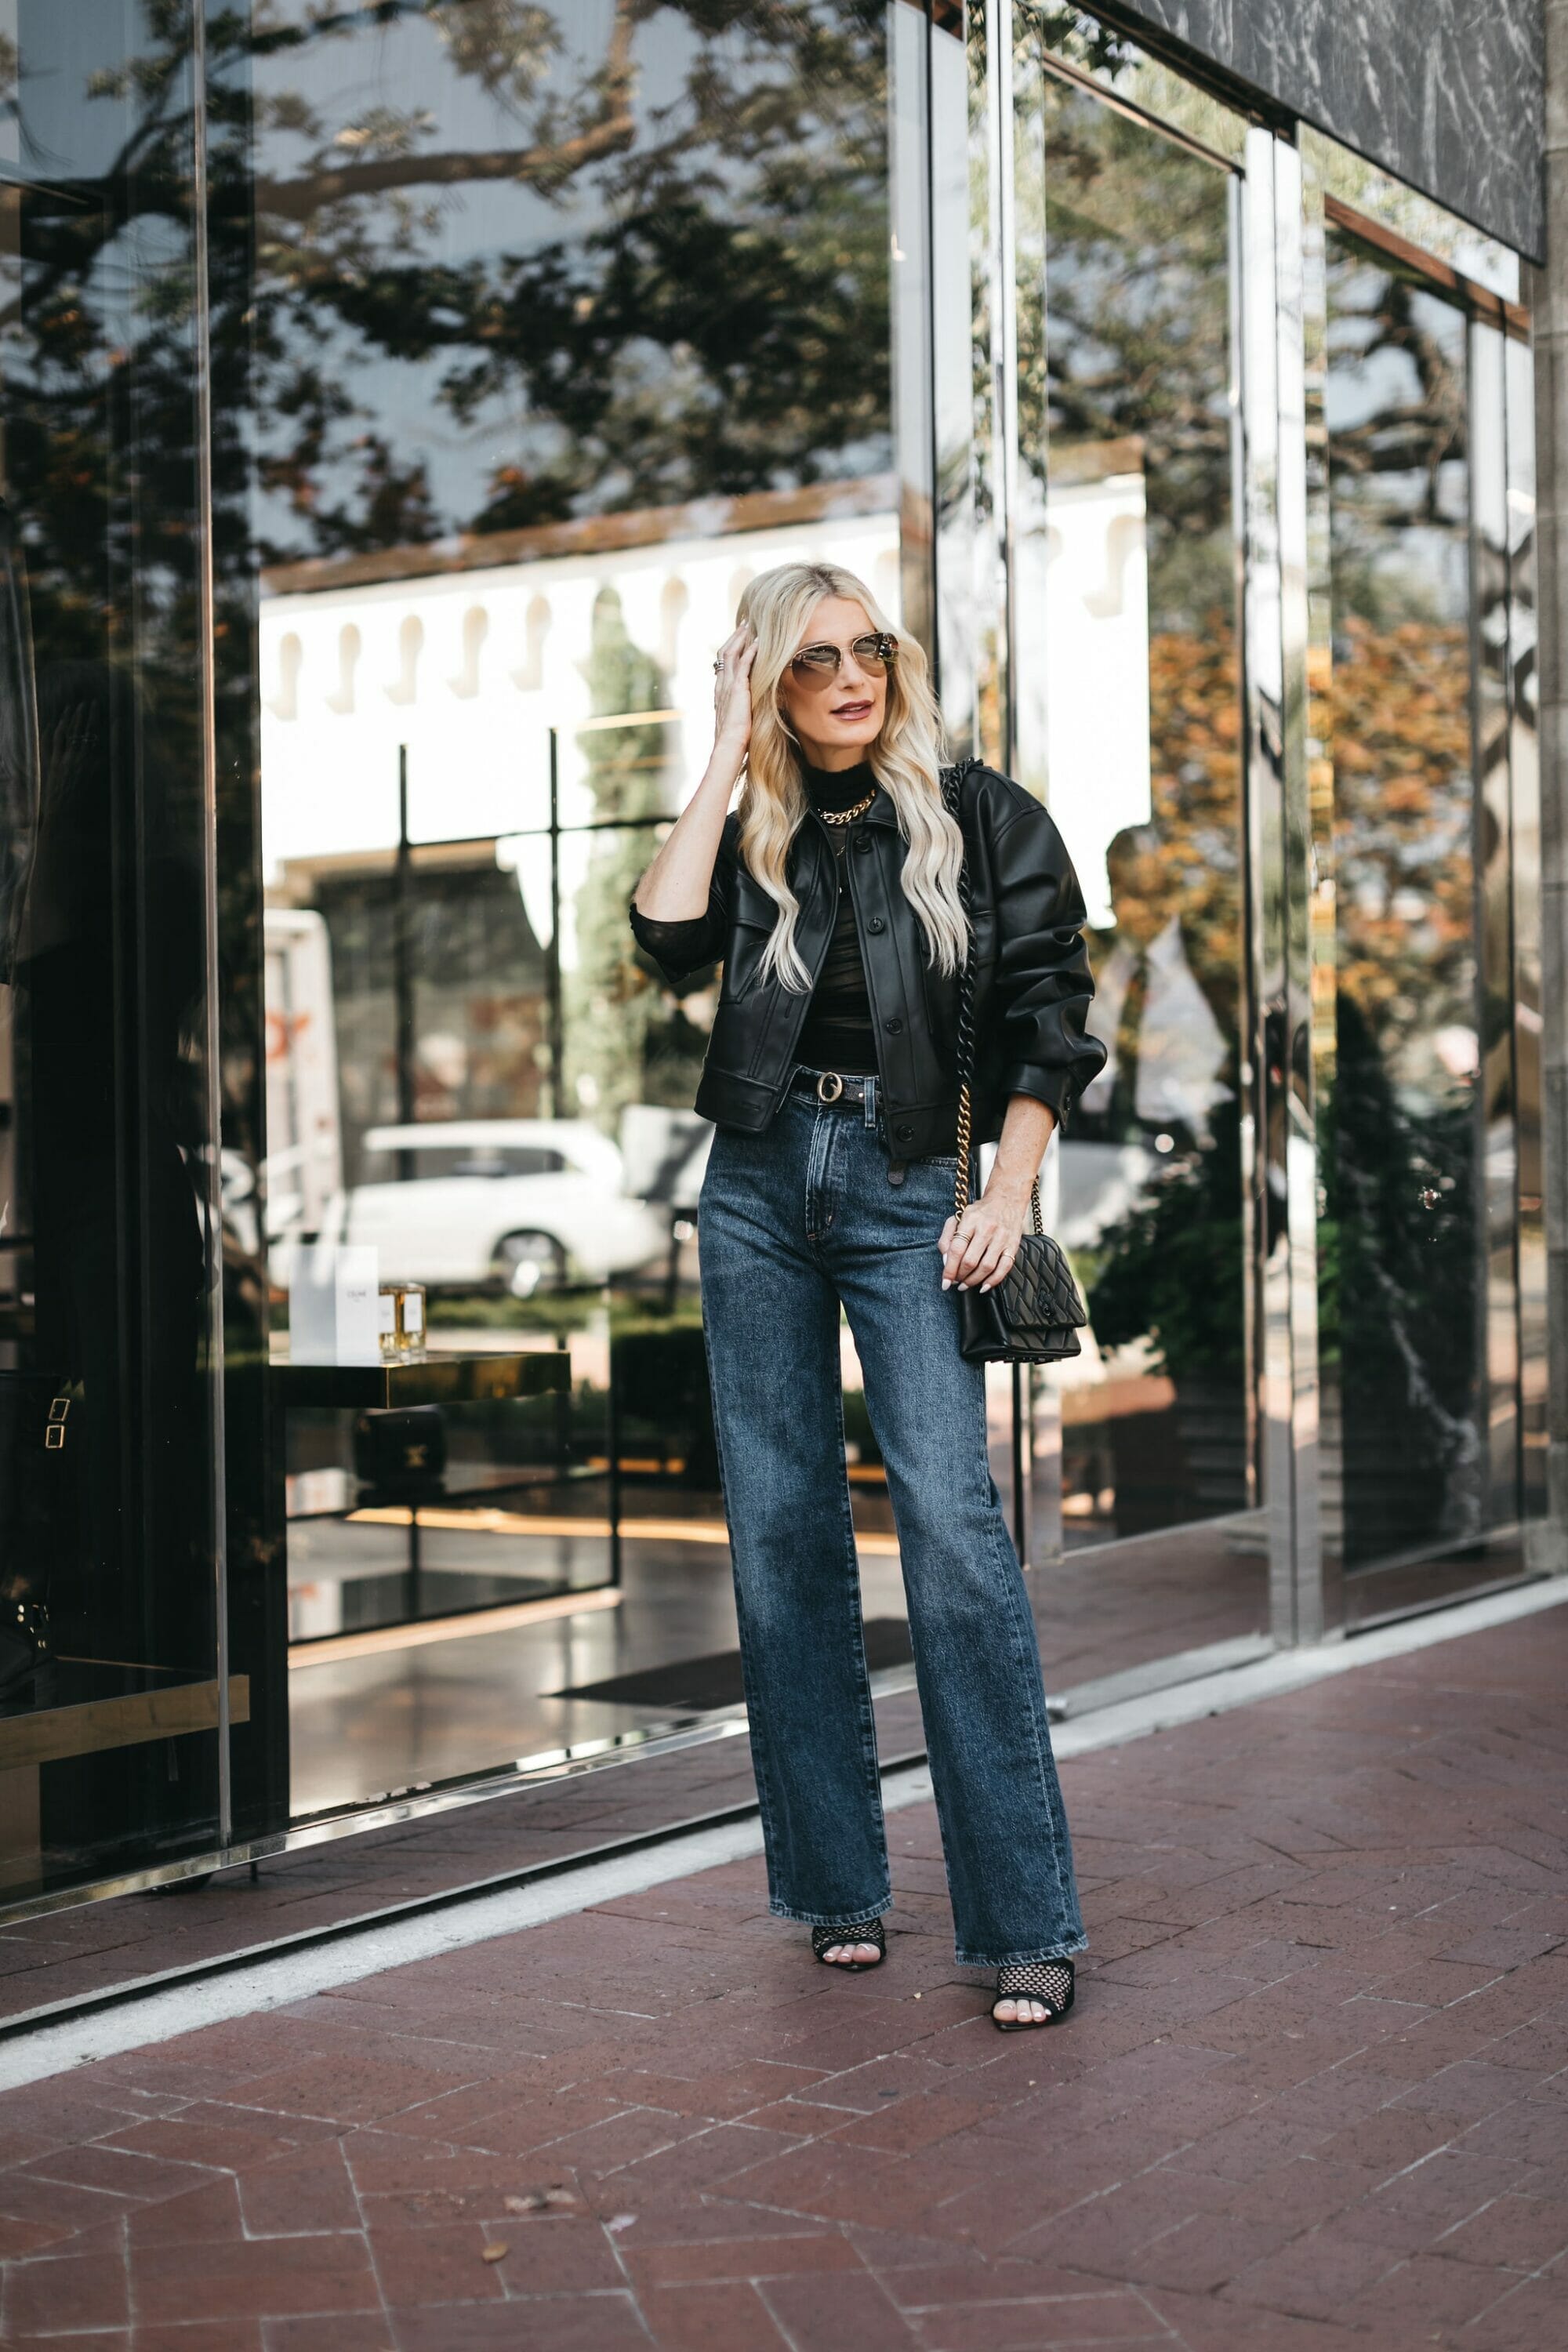 Dallas fashion influencer for women over 40 wears dark wash jeans with a leather bomber jacket as one of fall's hottest denim trends.